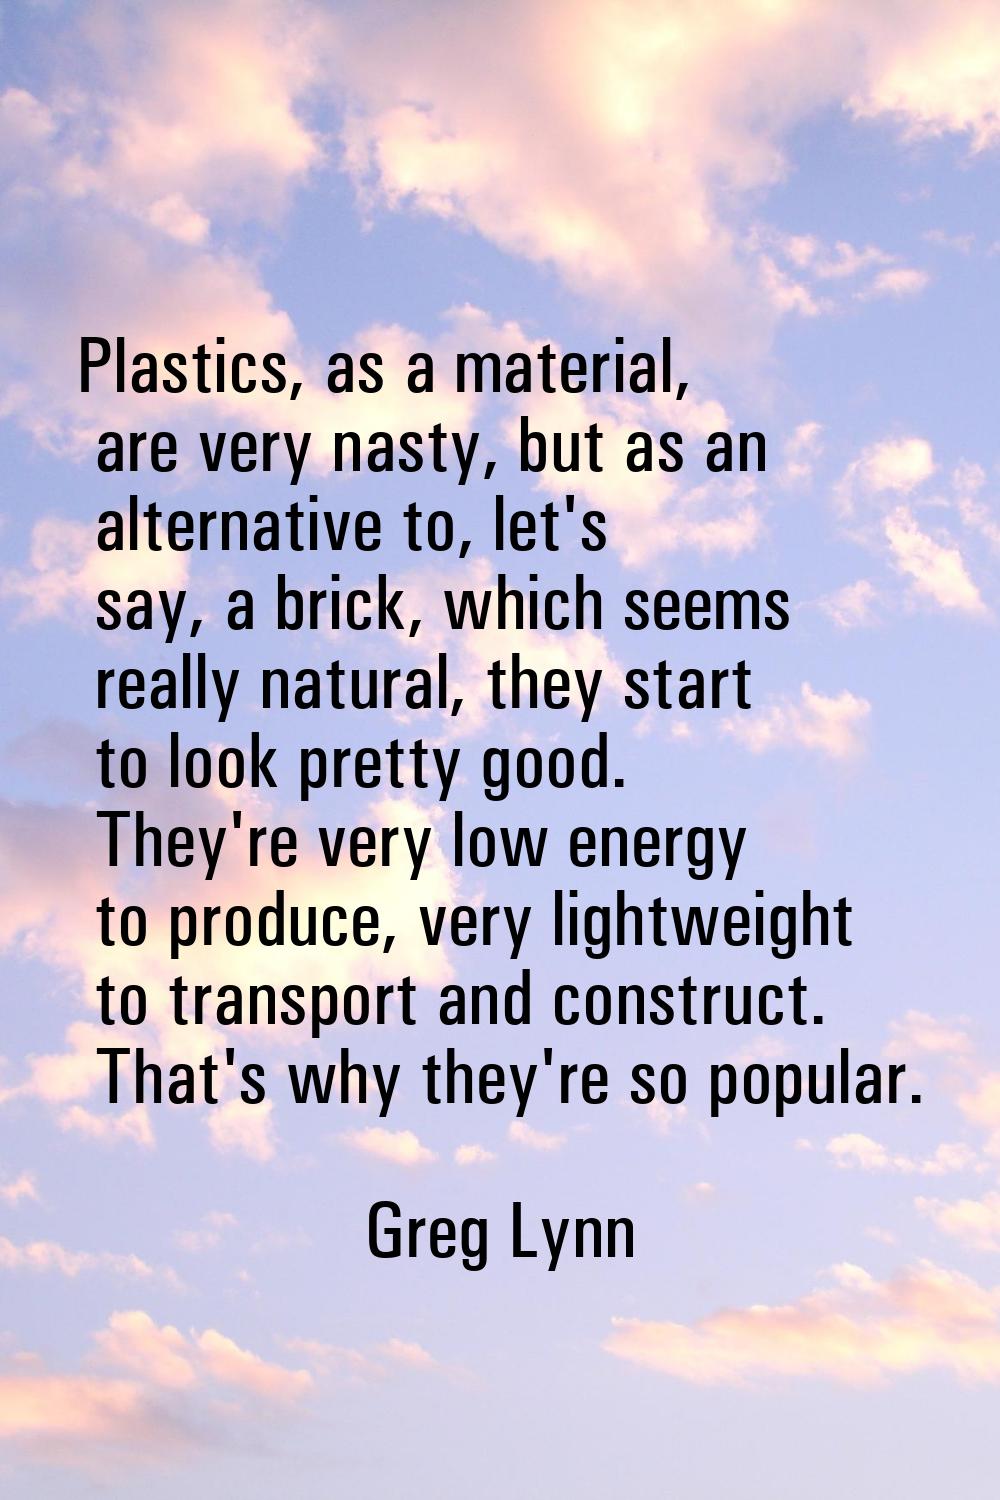 Plastics, as a material, are very nasty, but as an alternative to, let's say, a brick, which seems 